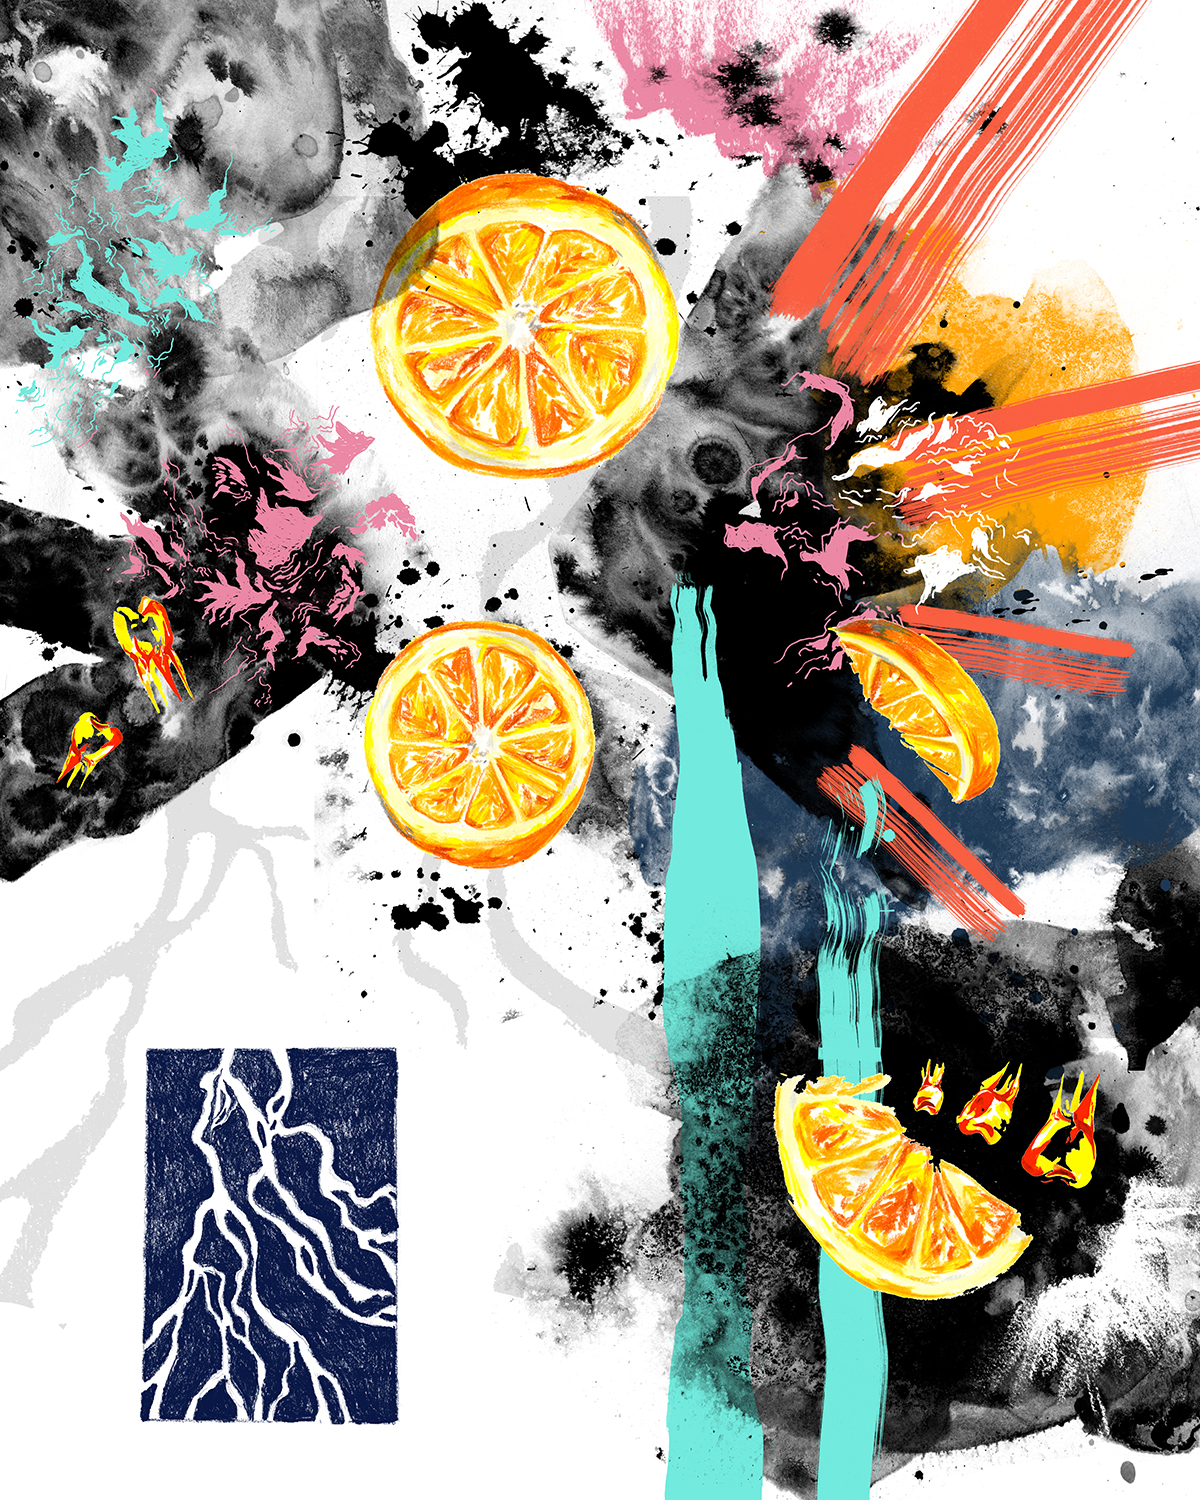 Expressive mixed media painting with slices of oranges and expressive, explosive brushstrokes